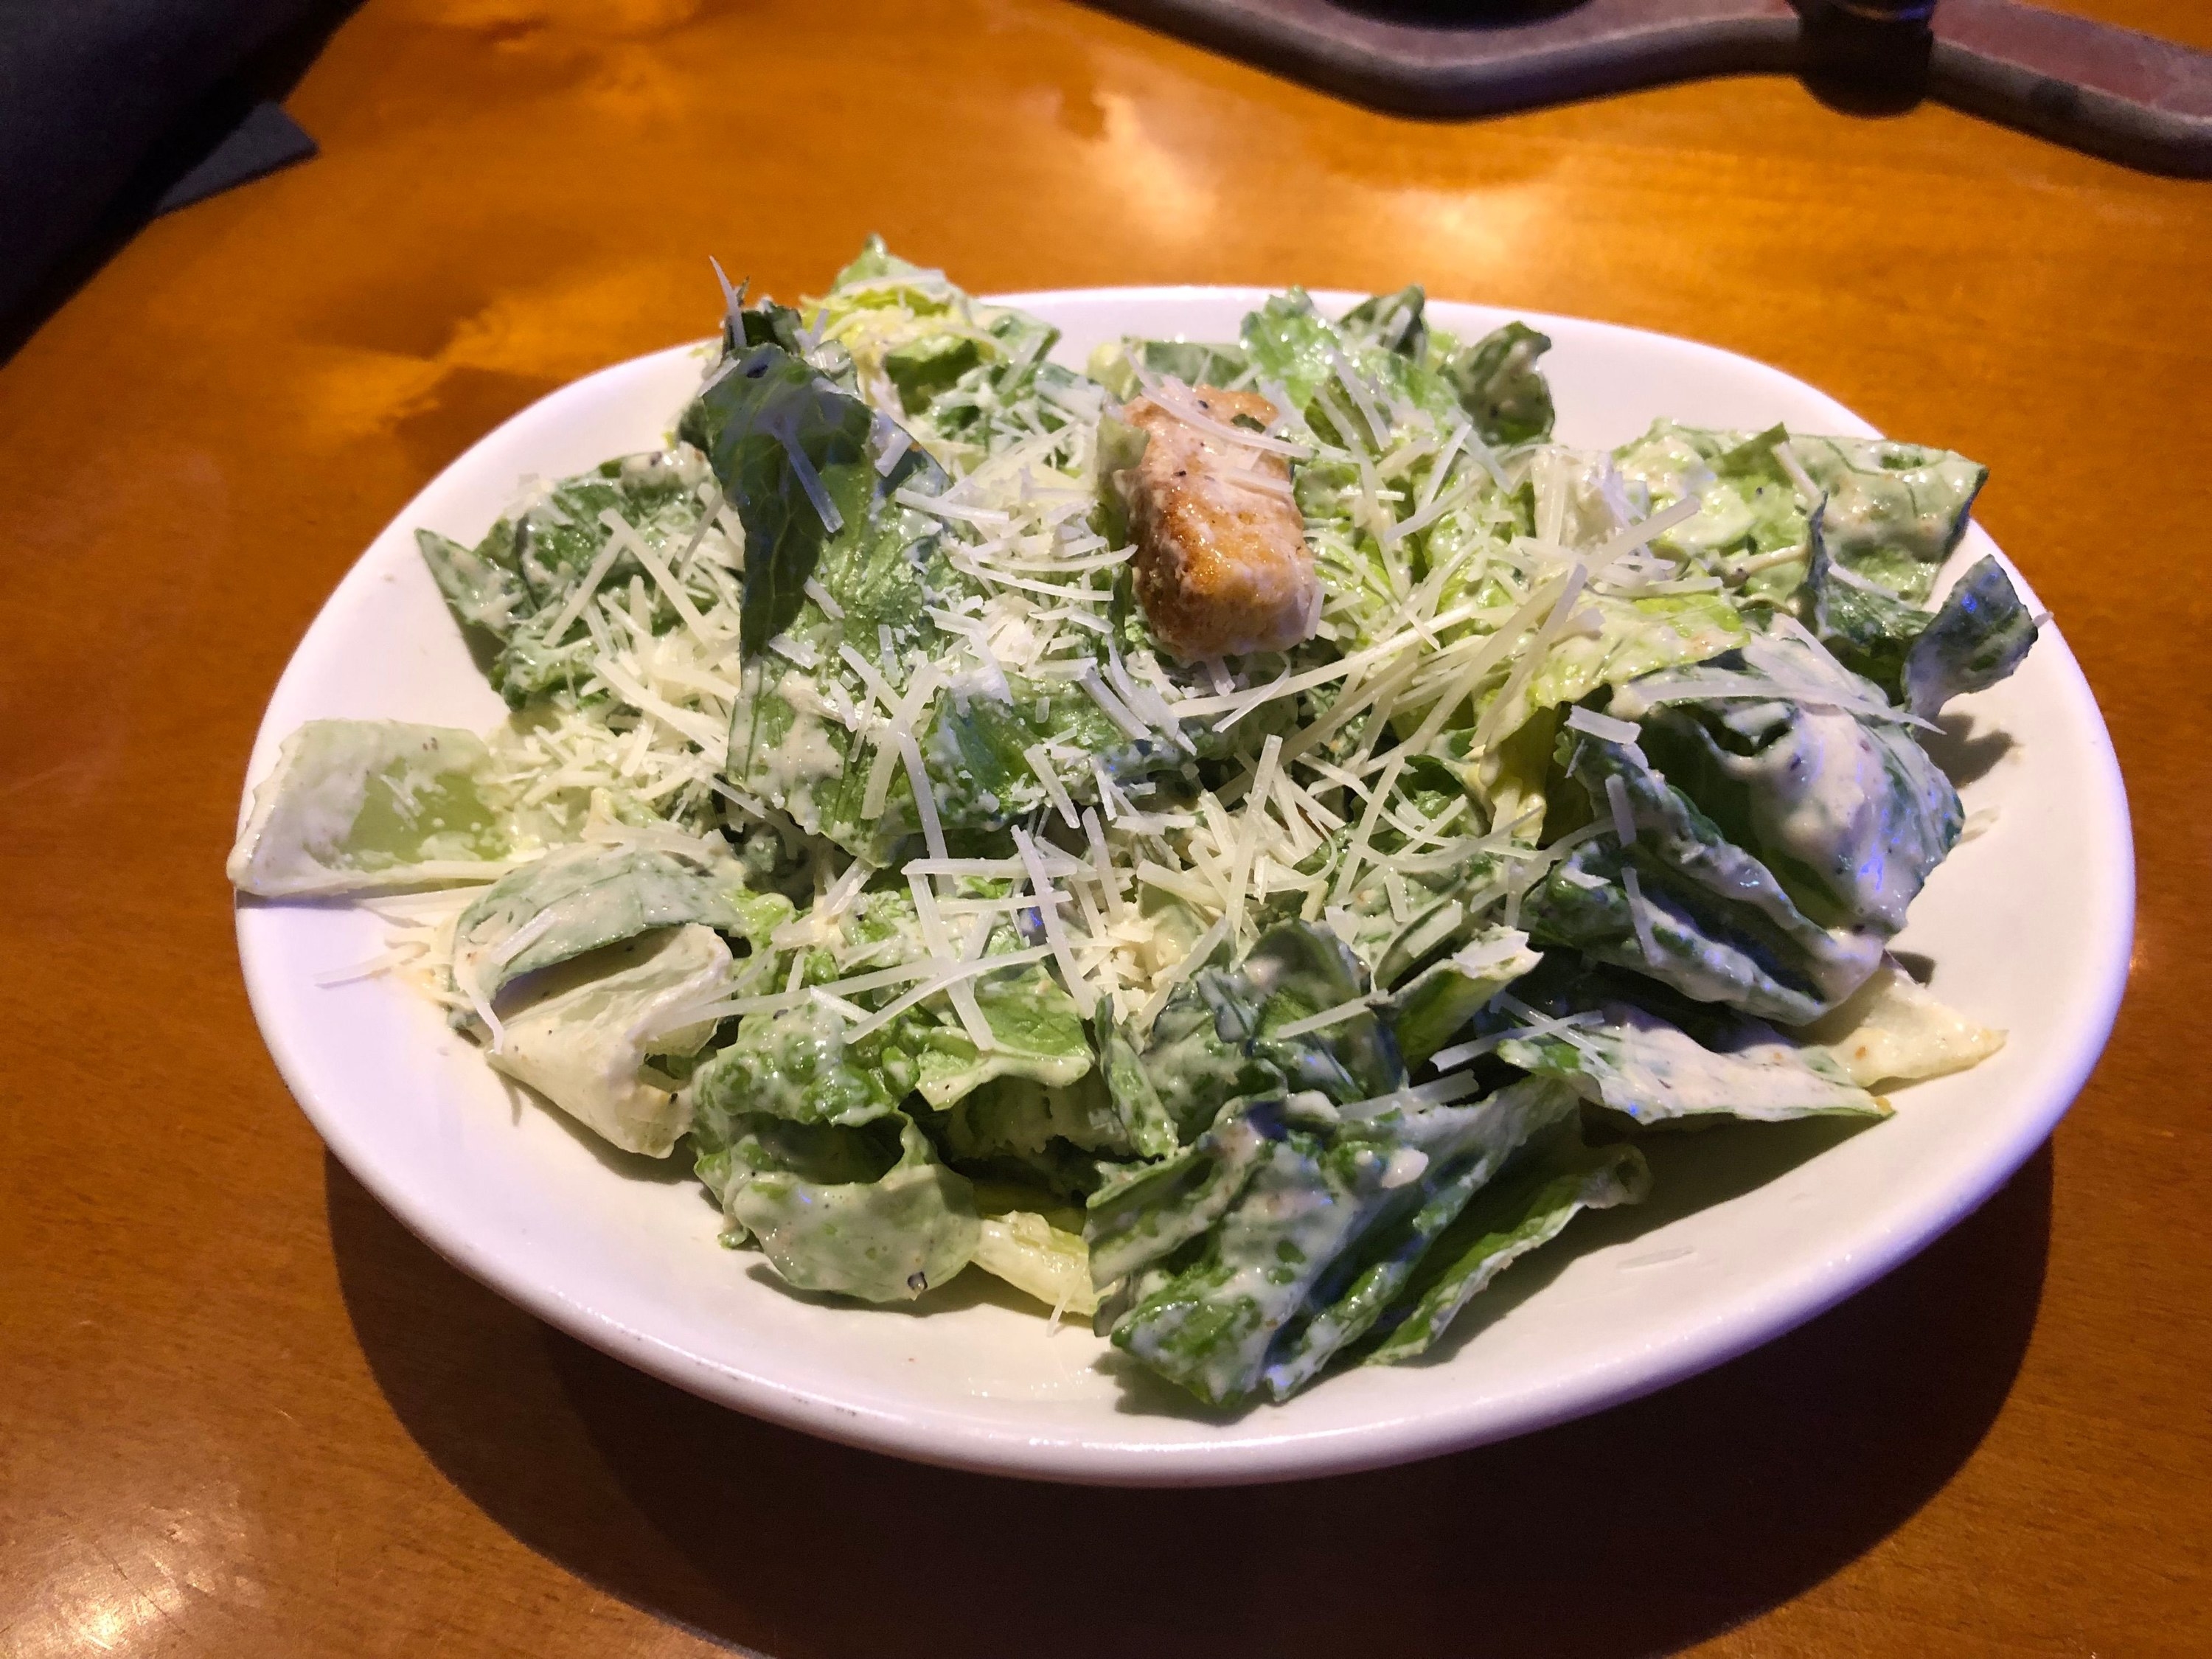 caesar salad from Outback Steakhouse